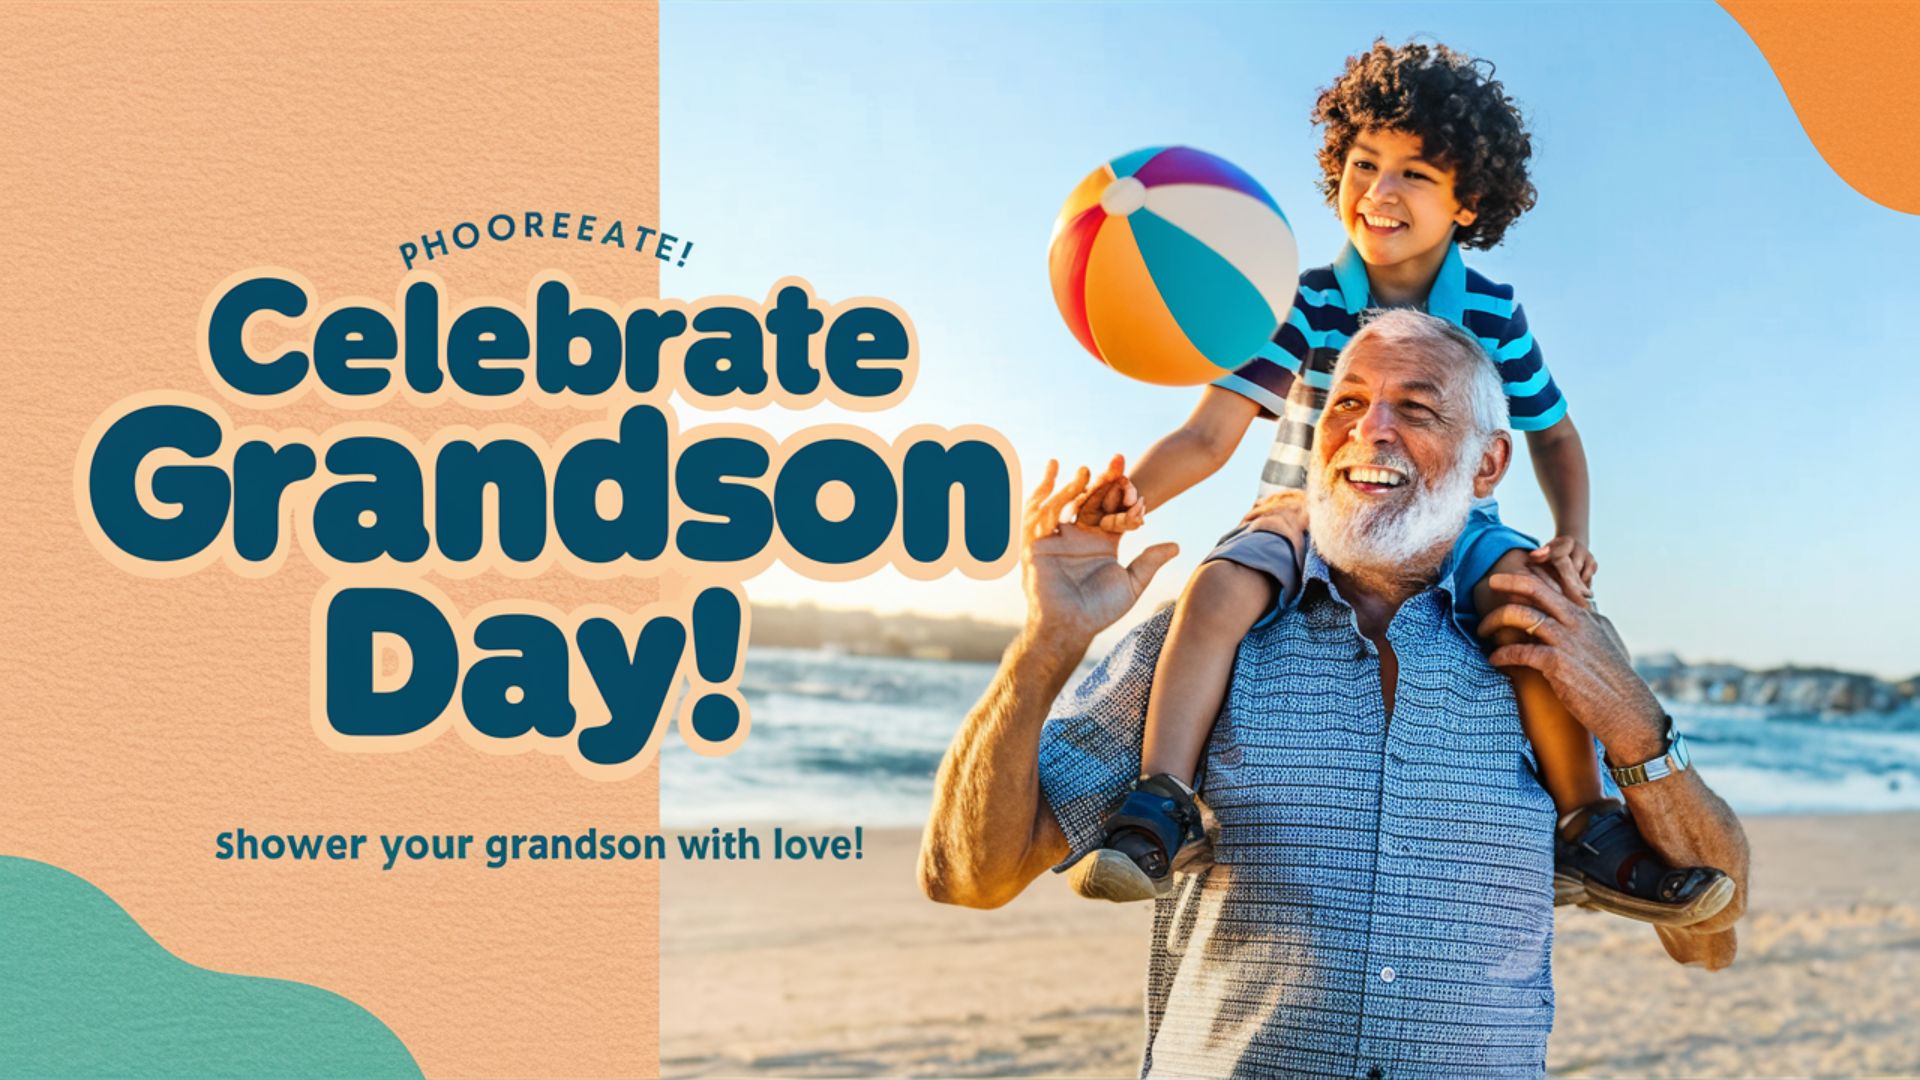 Grandson Day 2024 Special Occasion or Public Holiday?